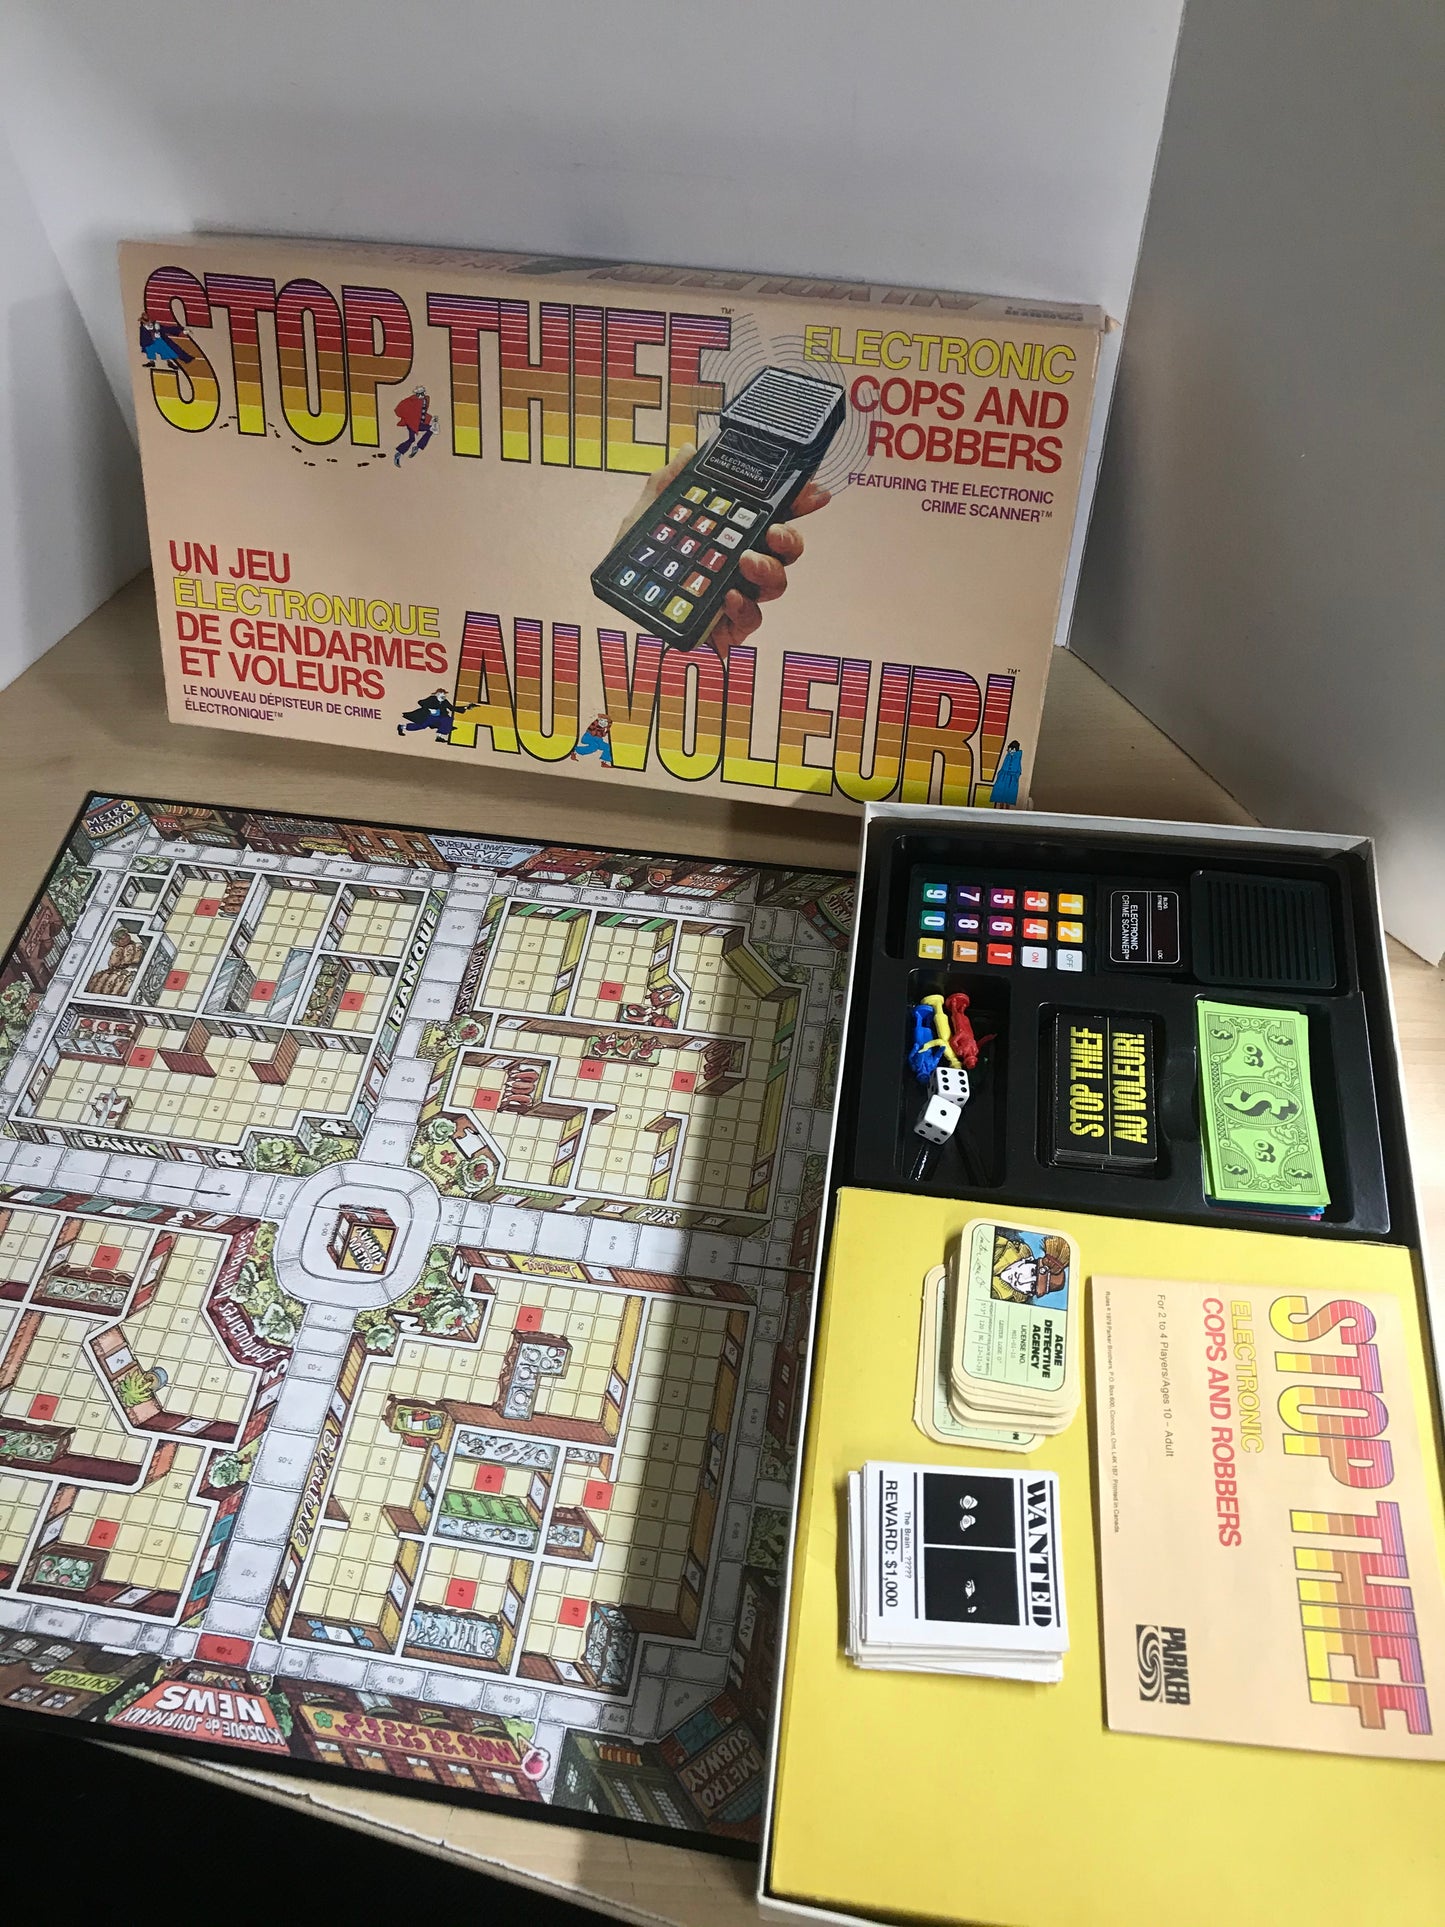 Game 1979 Vintage Parker Bros. STOP THIEF Electronic Cops Robbers Board Game Complete As New Works Perfect